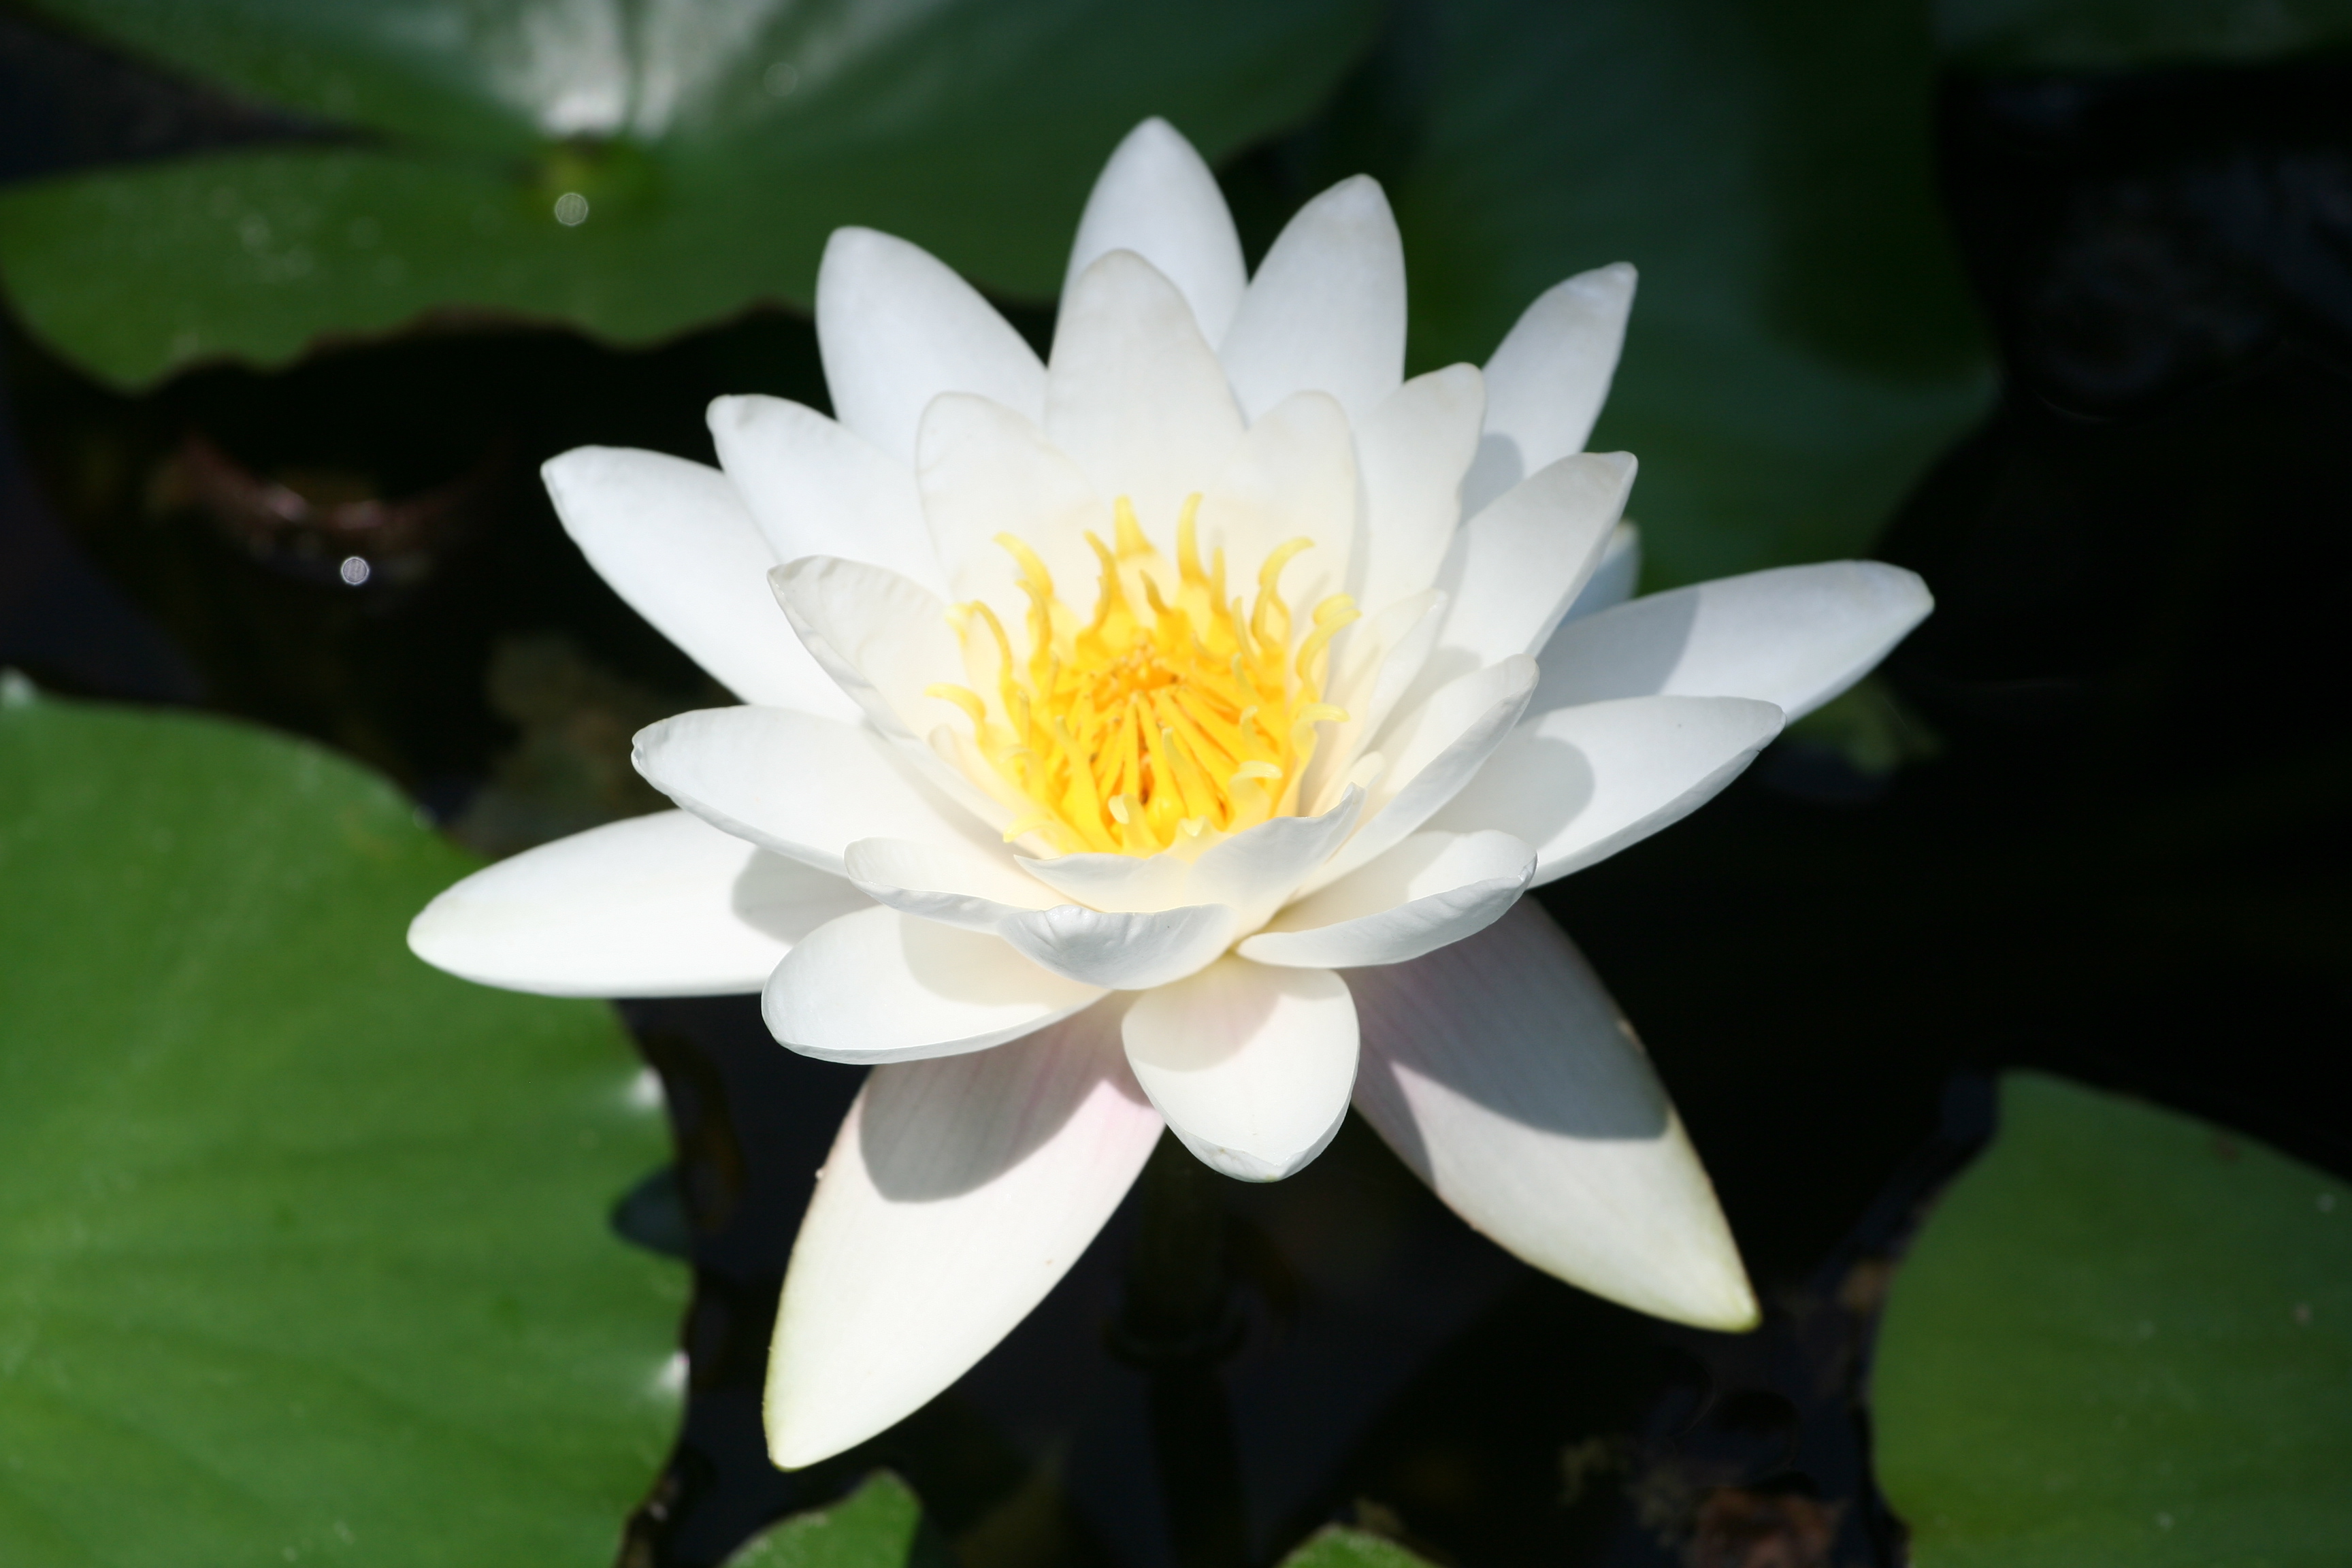 File:Water lily 1.jpg - Wikimedia Commons